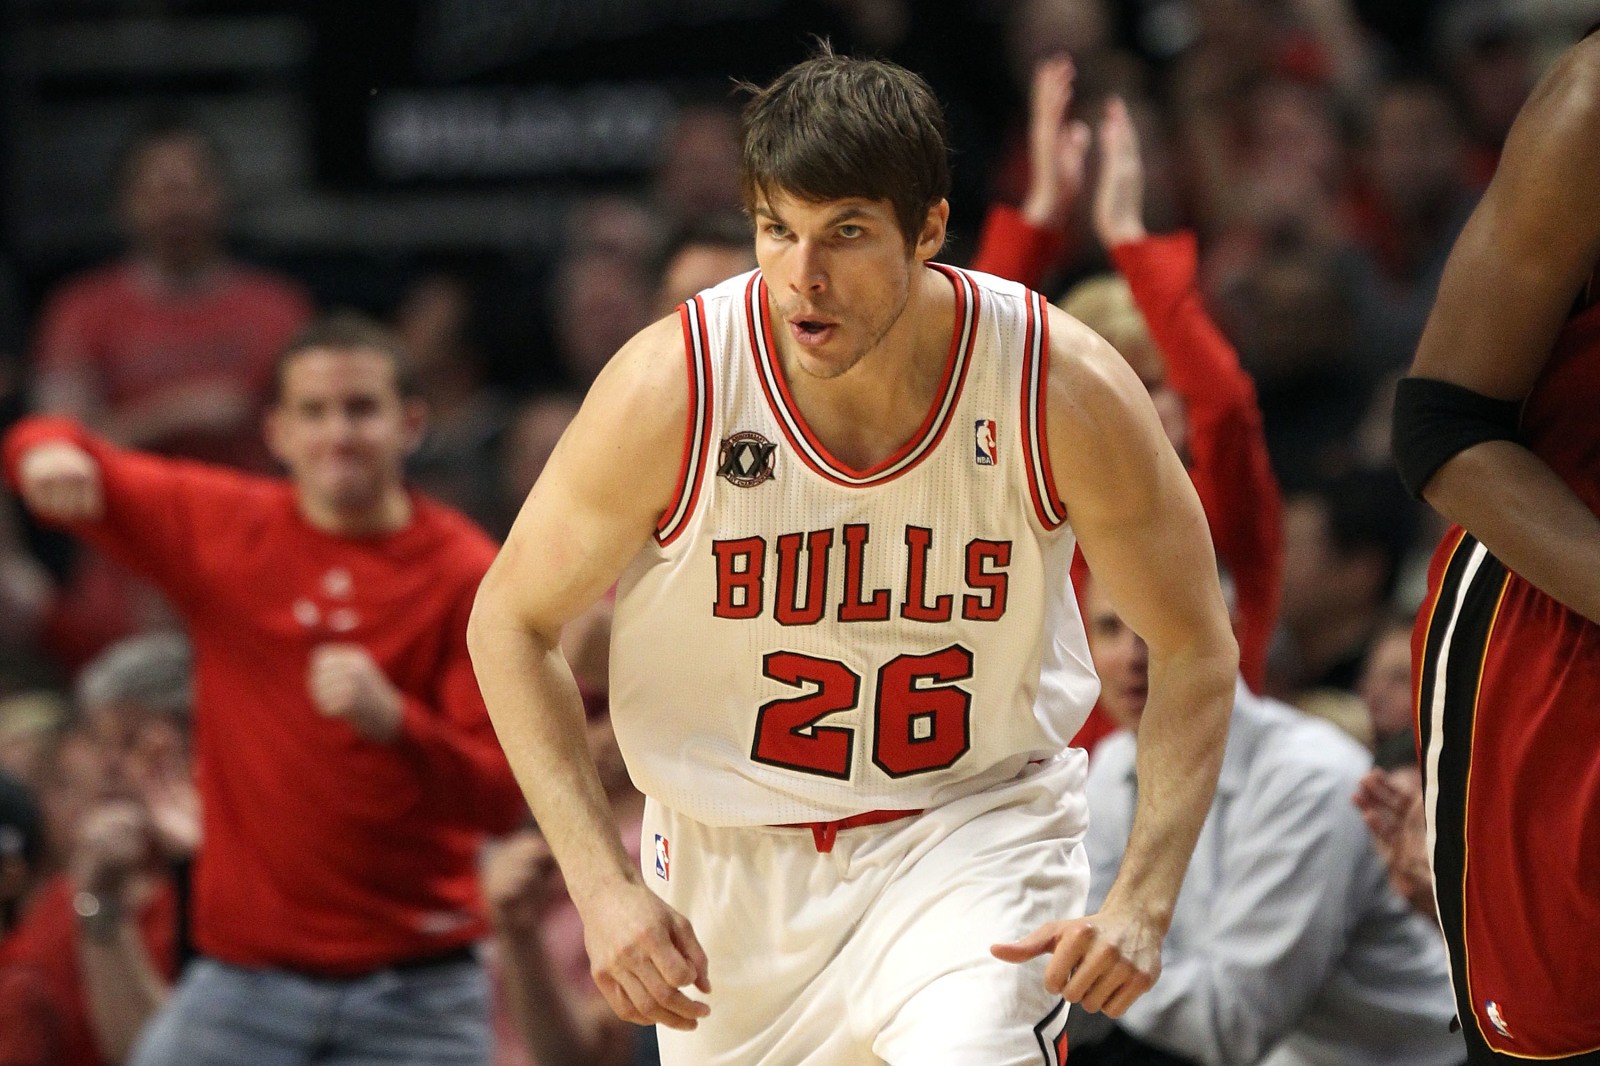 Chicago Bulls: 3 best shooters for the team during the 2010’s